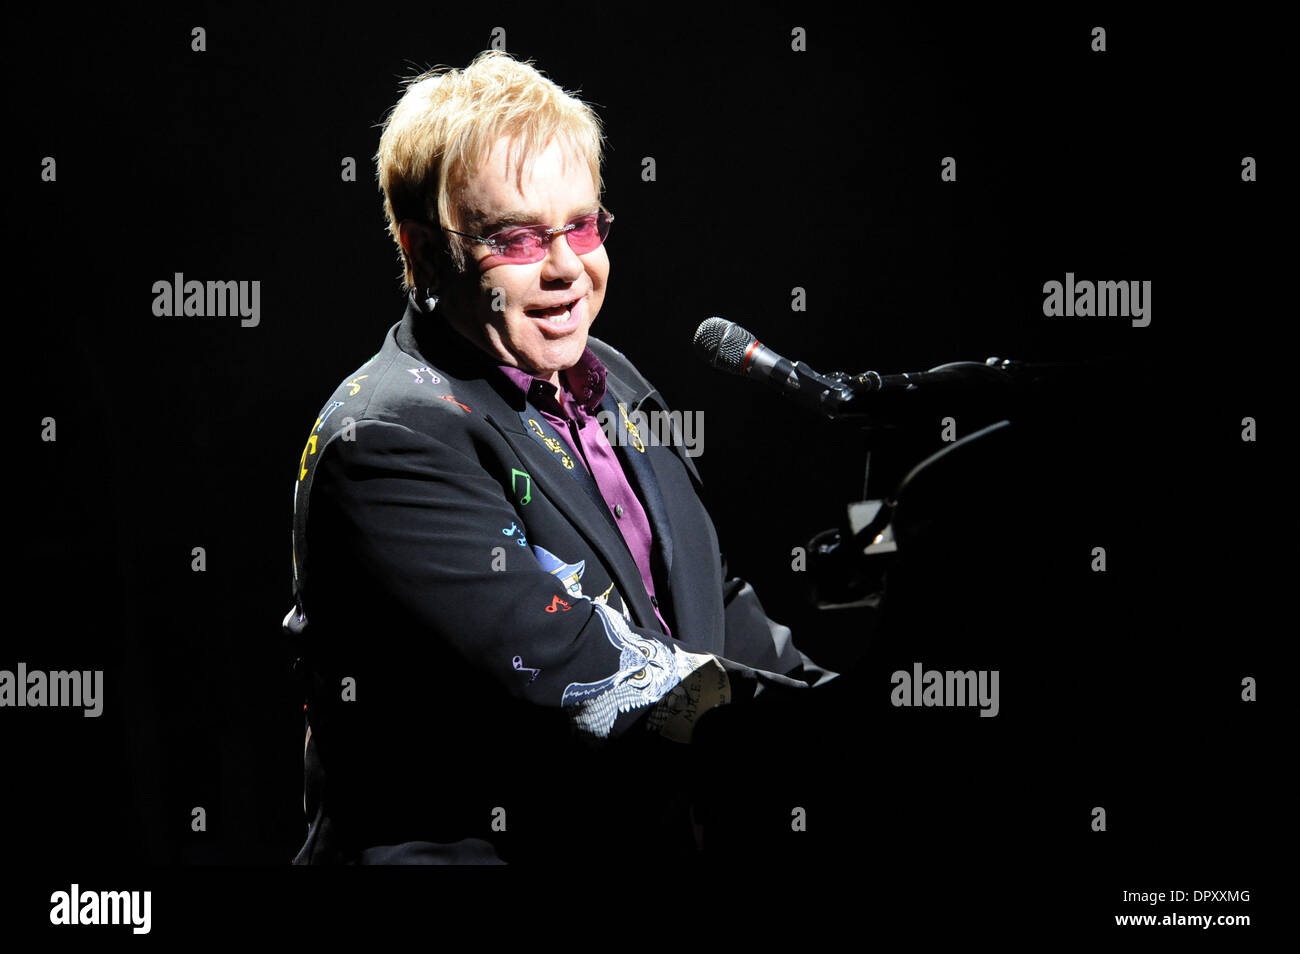 Mar 07, 2009 - Charlotte, North Carolina, USA - Musician ELTON JOHN performs live as his 2009 Face 2 Face tour with Billy Joel makes a stop to a sold out audience at The Time Warner Cable Arena located in downtown Charlotte. (Credit Image: © Jason Moore/ZUMA Press) Stock Photo